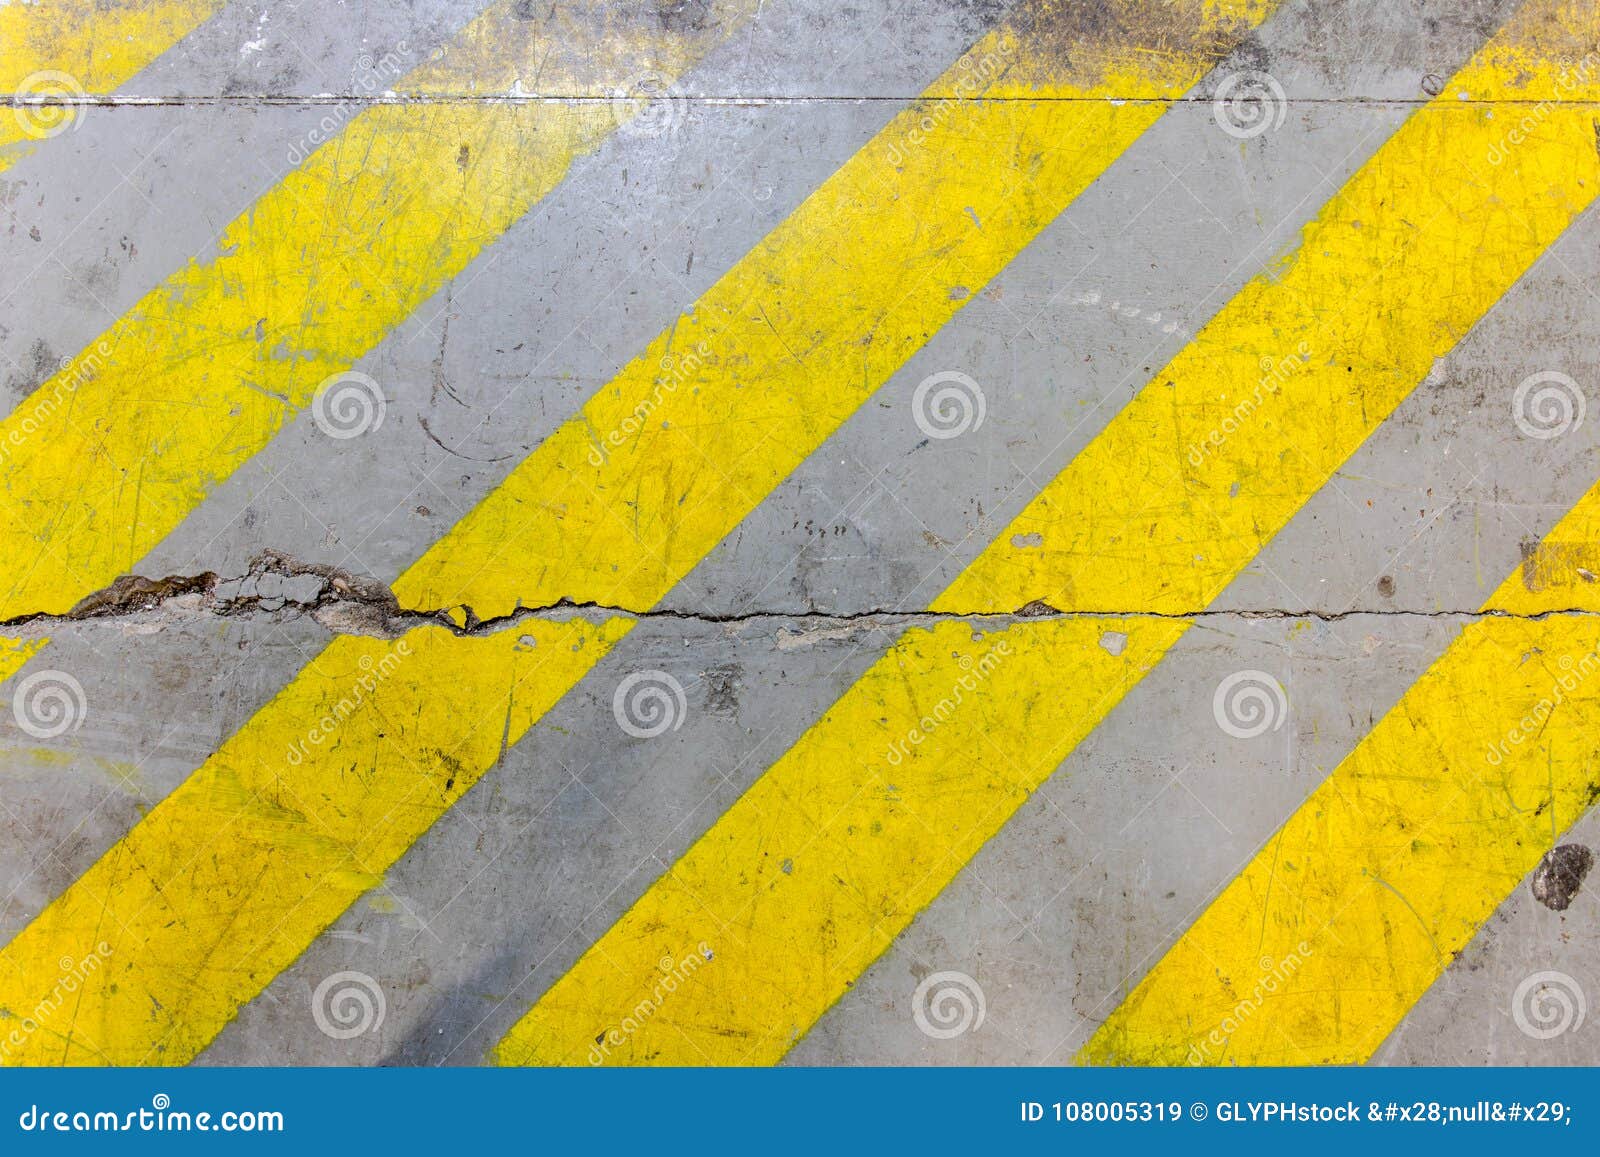 Safety Zone Paint Texture Stock Image Image Of Industrial 108005319